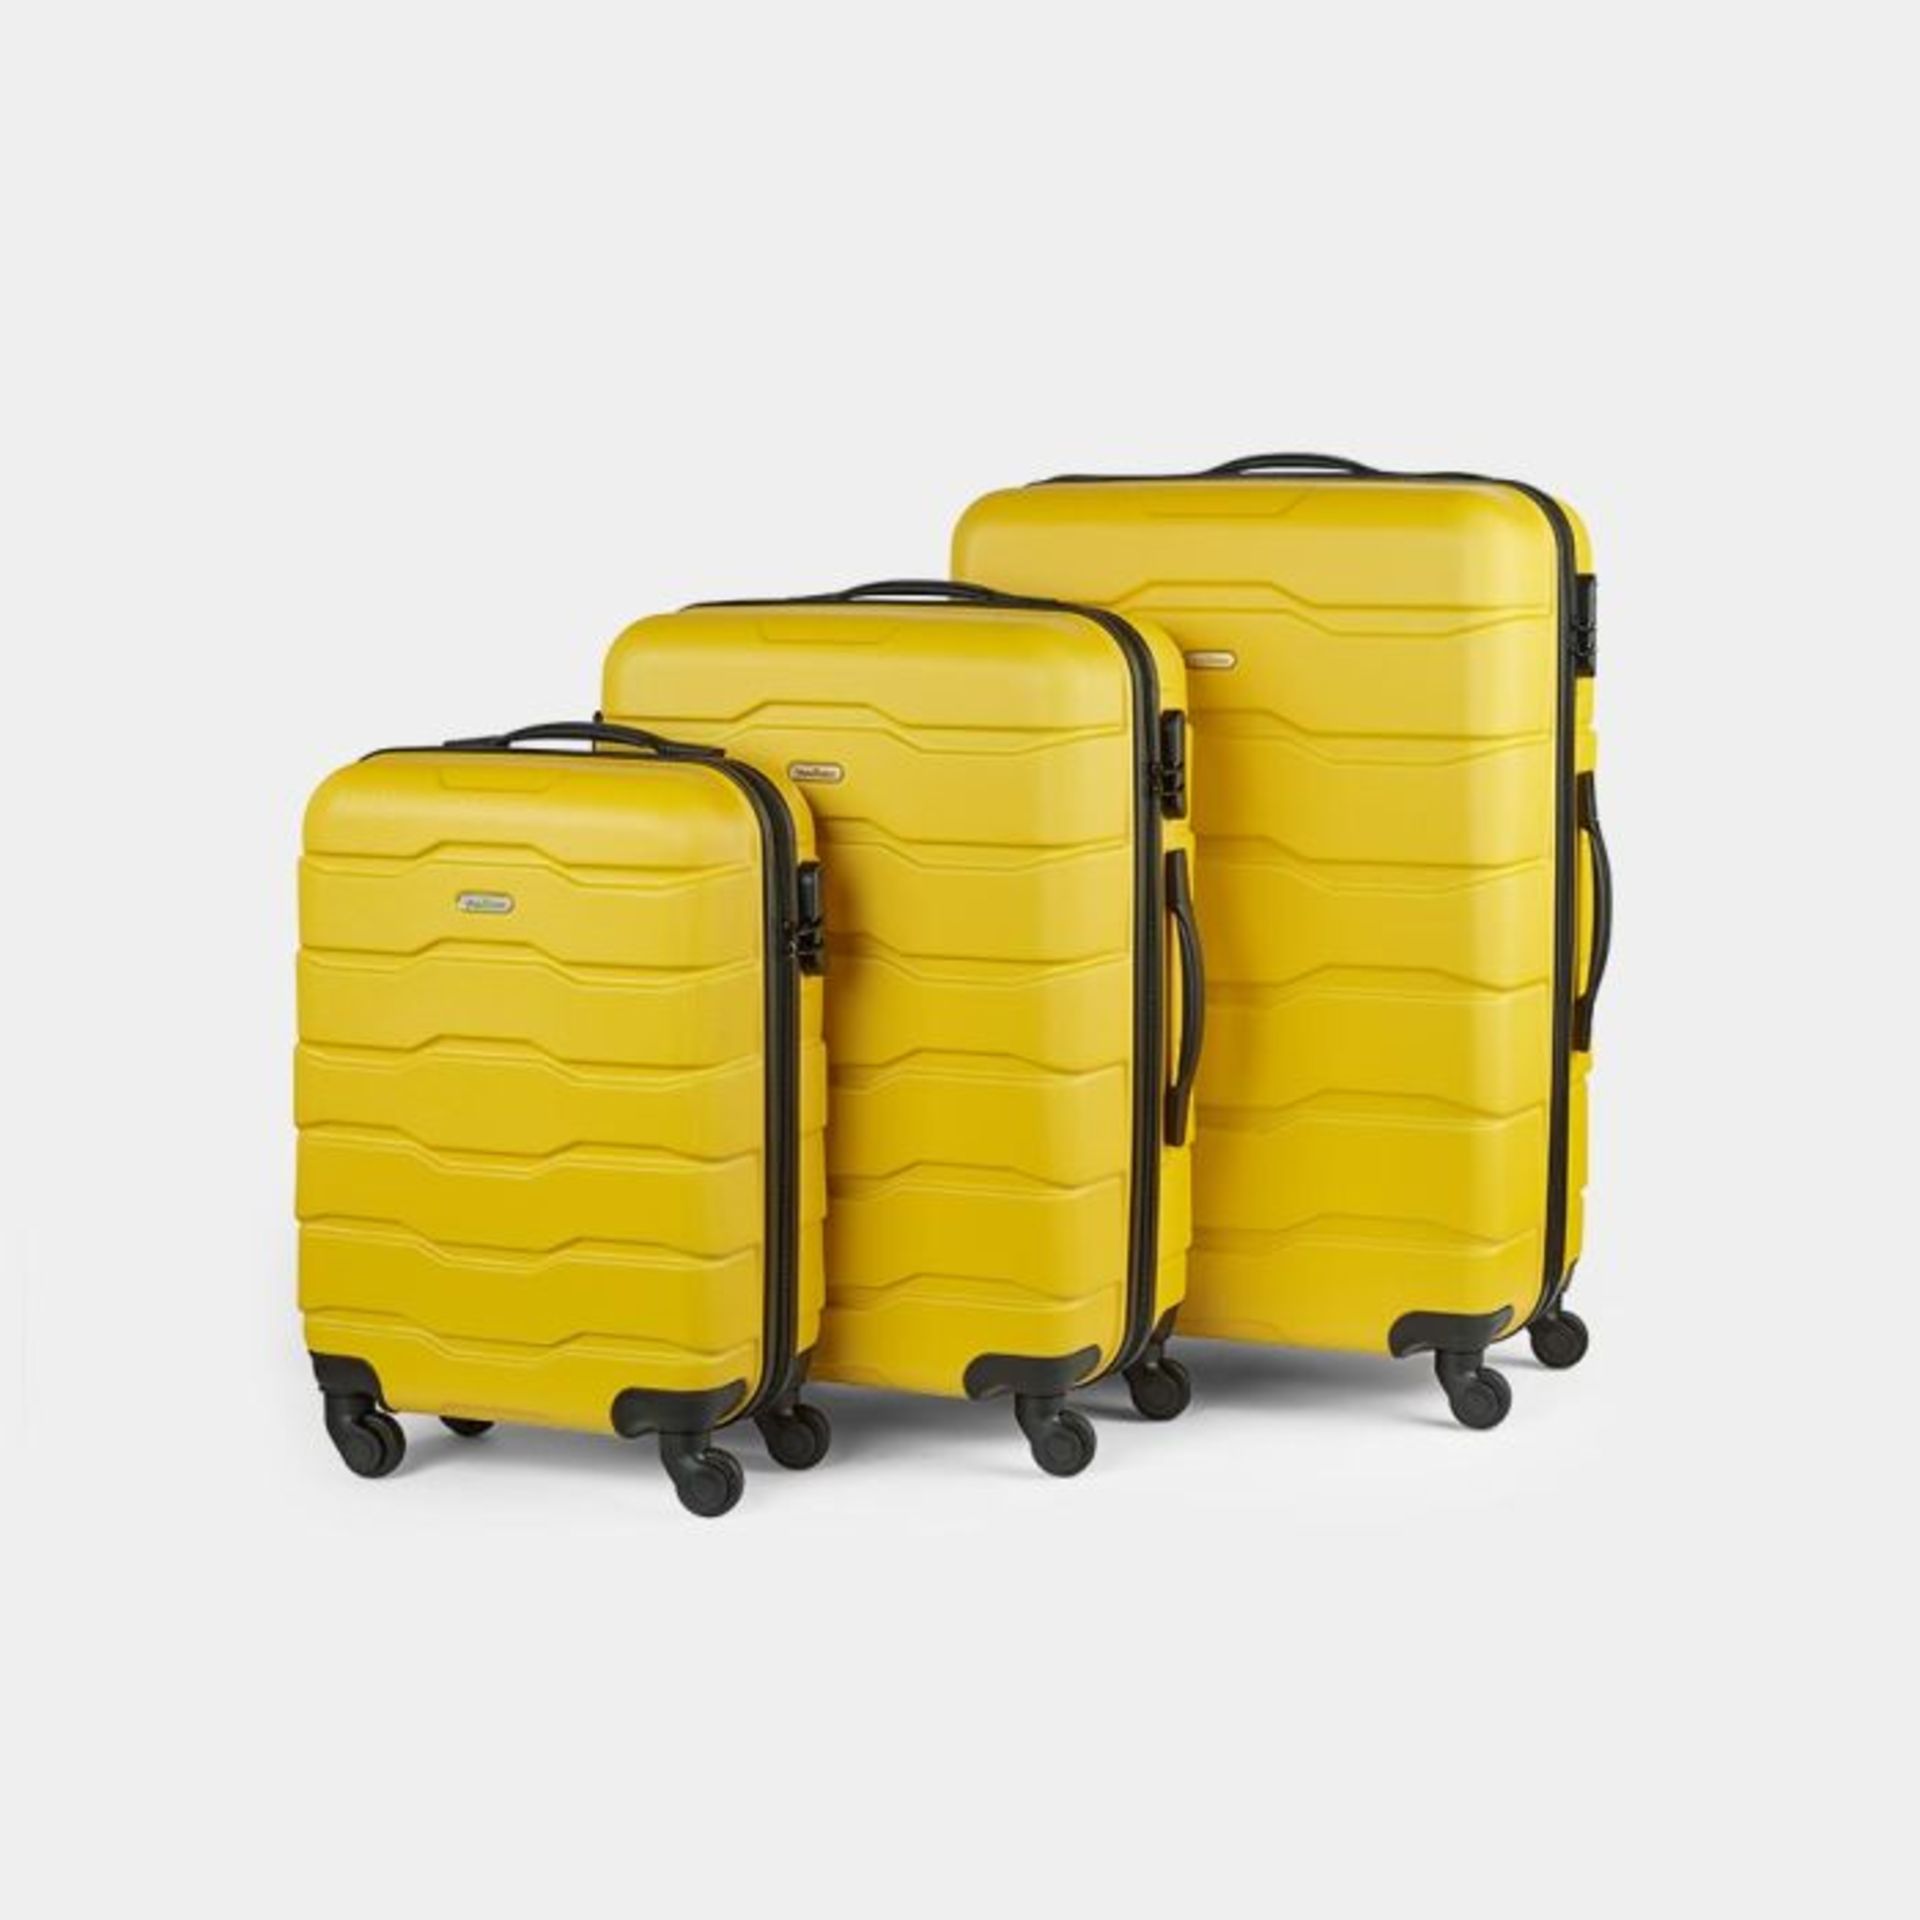 3pc ABS Yellow Luggage Set. - S2BW. Whether you’re going on a weekend away or your summer